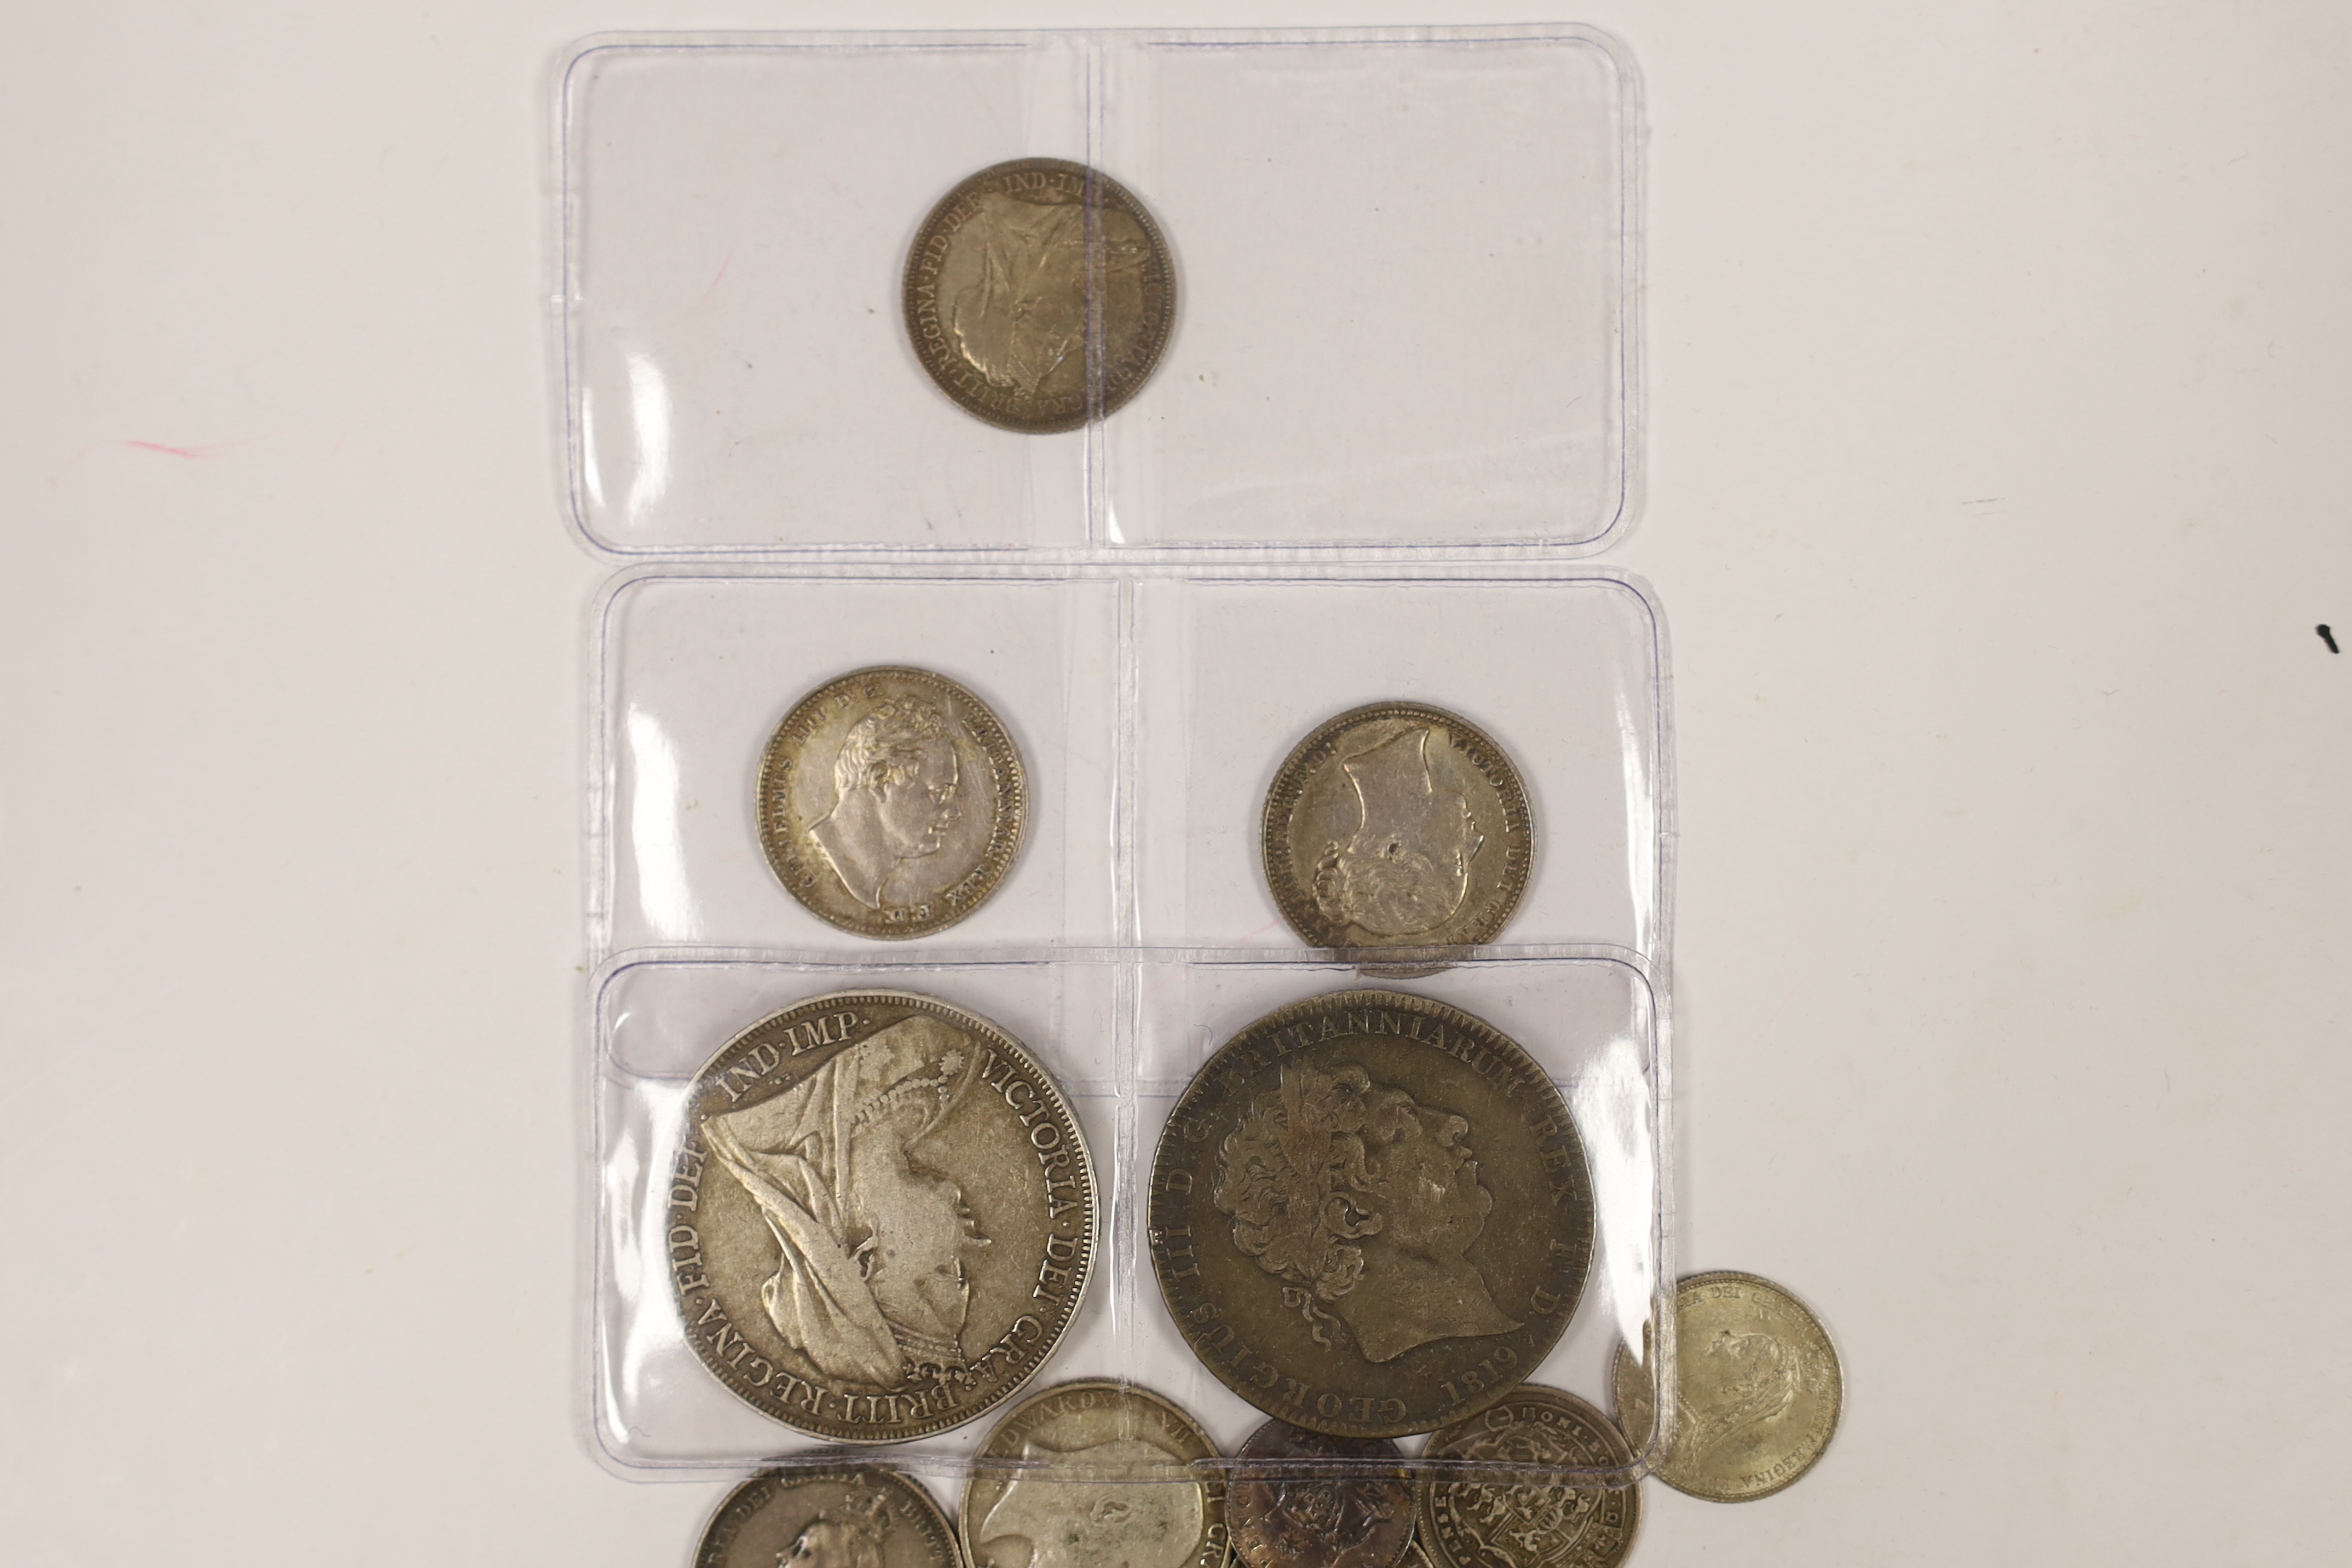 British silver coins, George III to George V, including a William IV shilling 1834, VF, various Victoria shillings 1870, VF, 1901 good VF etc. two crowns, 1819 and 1895, and mixed George III and later silver